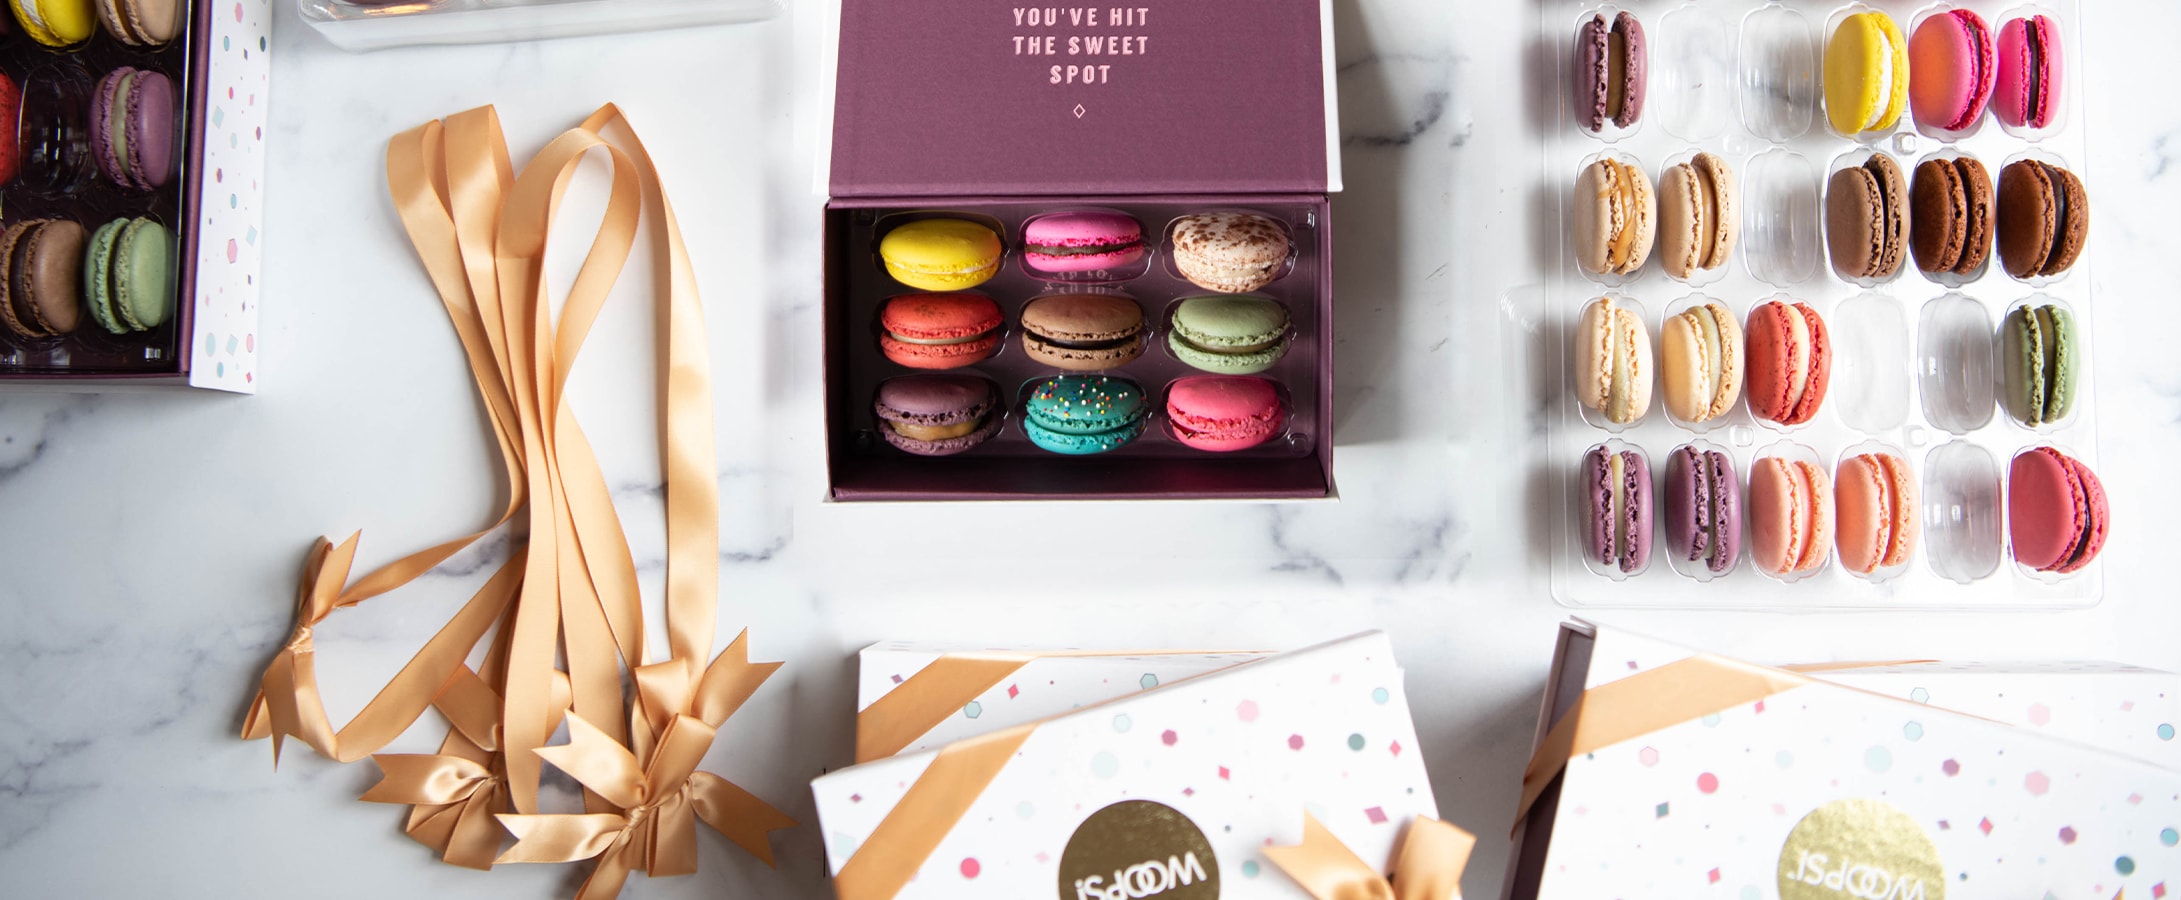 A tray and a box full of French macarons are surrounded by macaron boxes and golden ribbons.